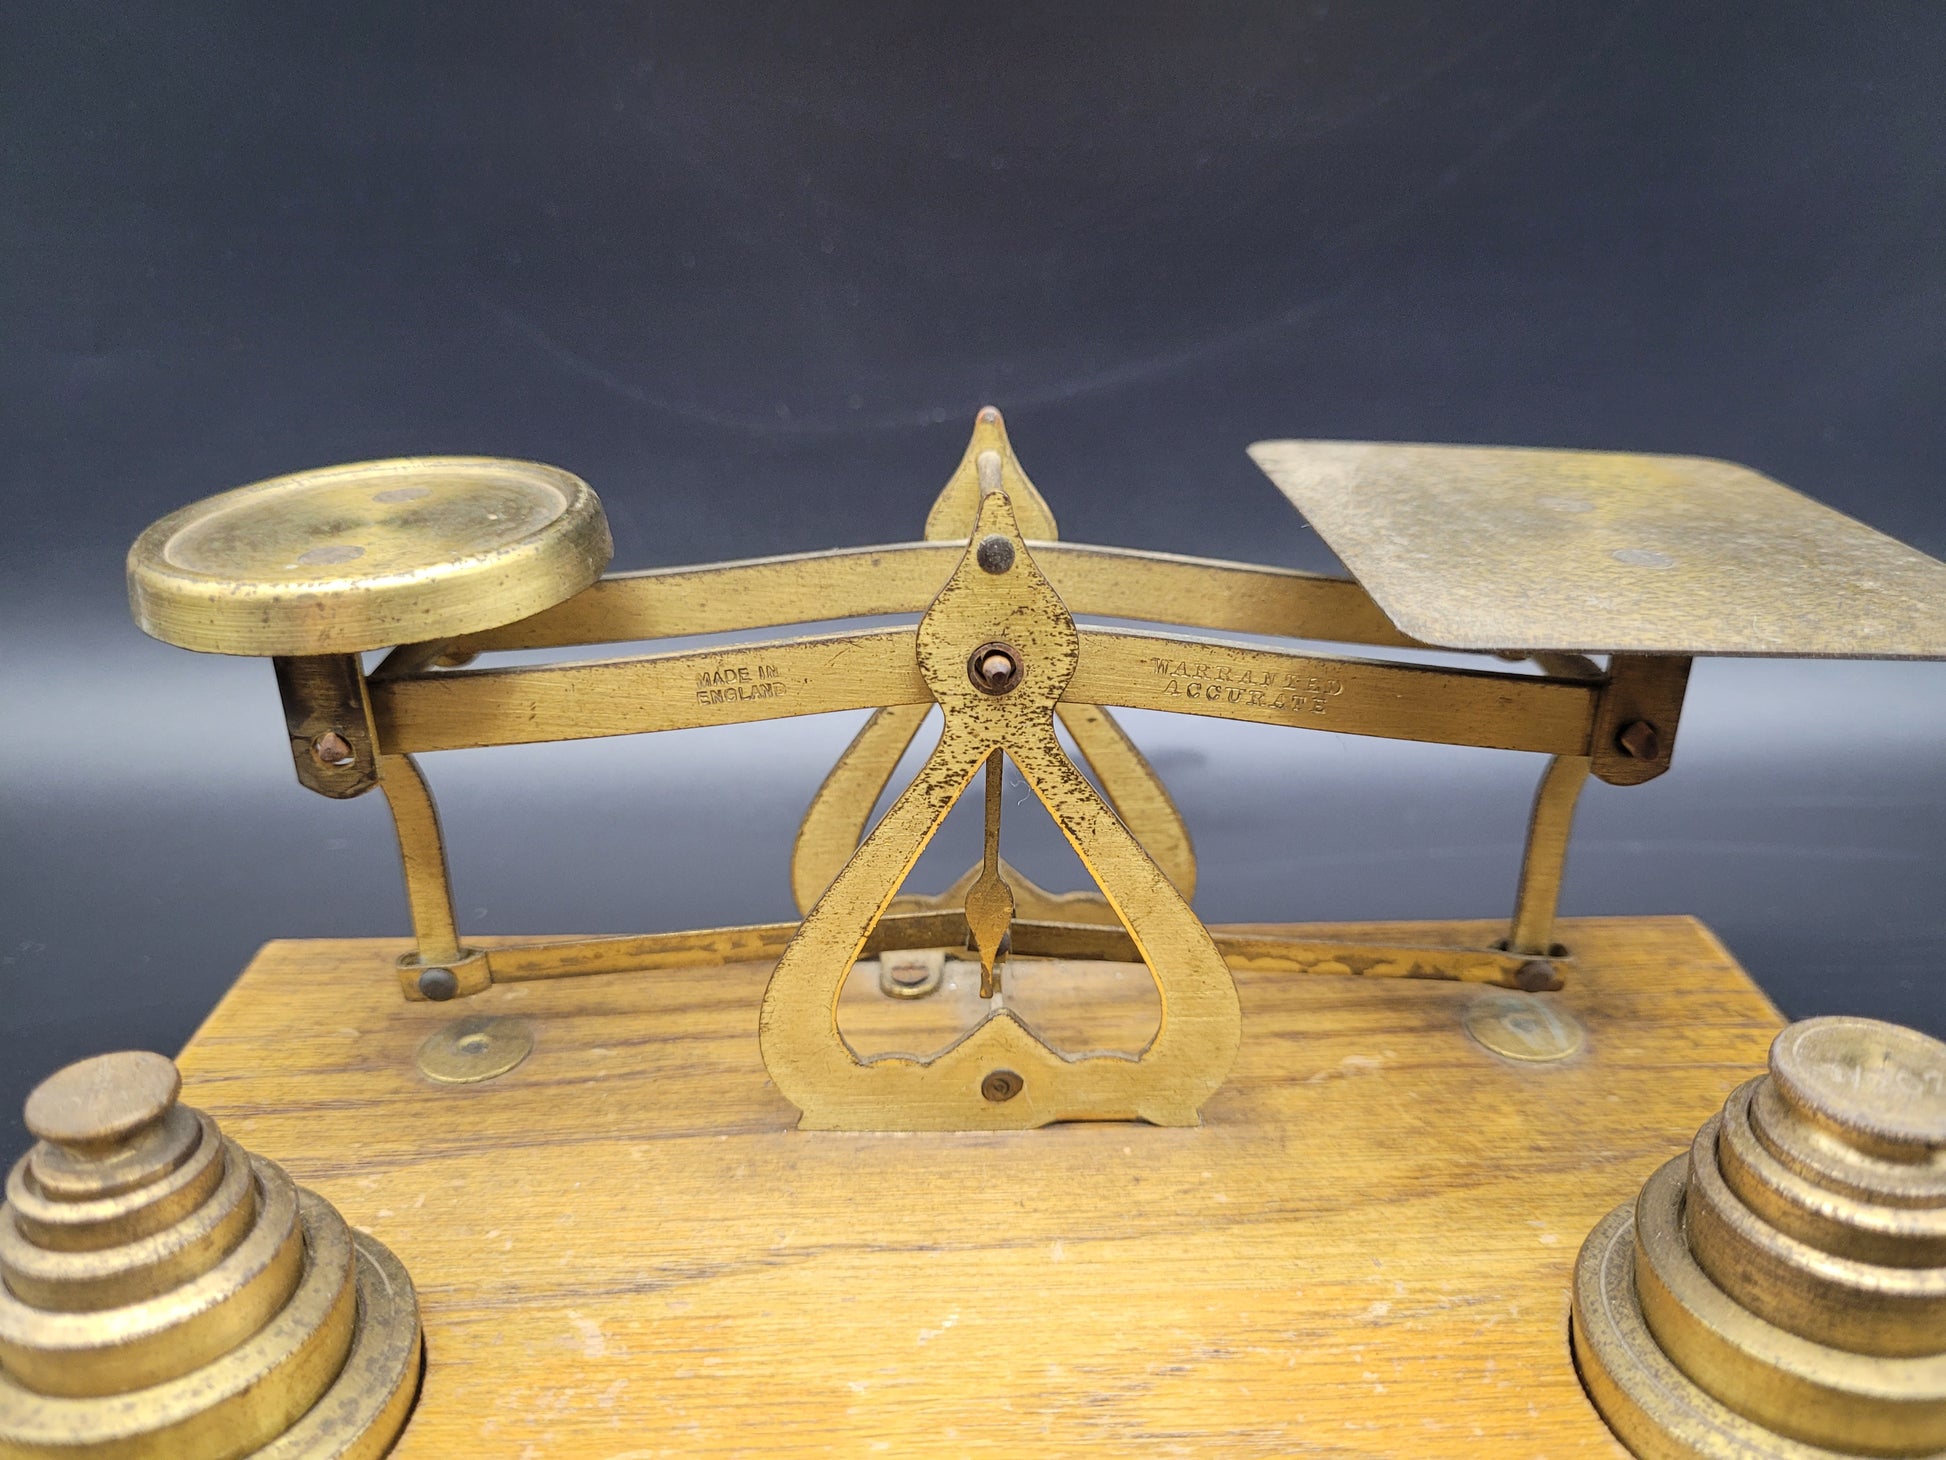 ANTIQUE SMALL WARRANTED ACCURATE SCALE w/ WEIGHTS 2 OZ, 1 OZ, 1/2 OZ